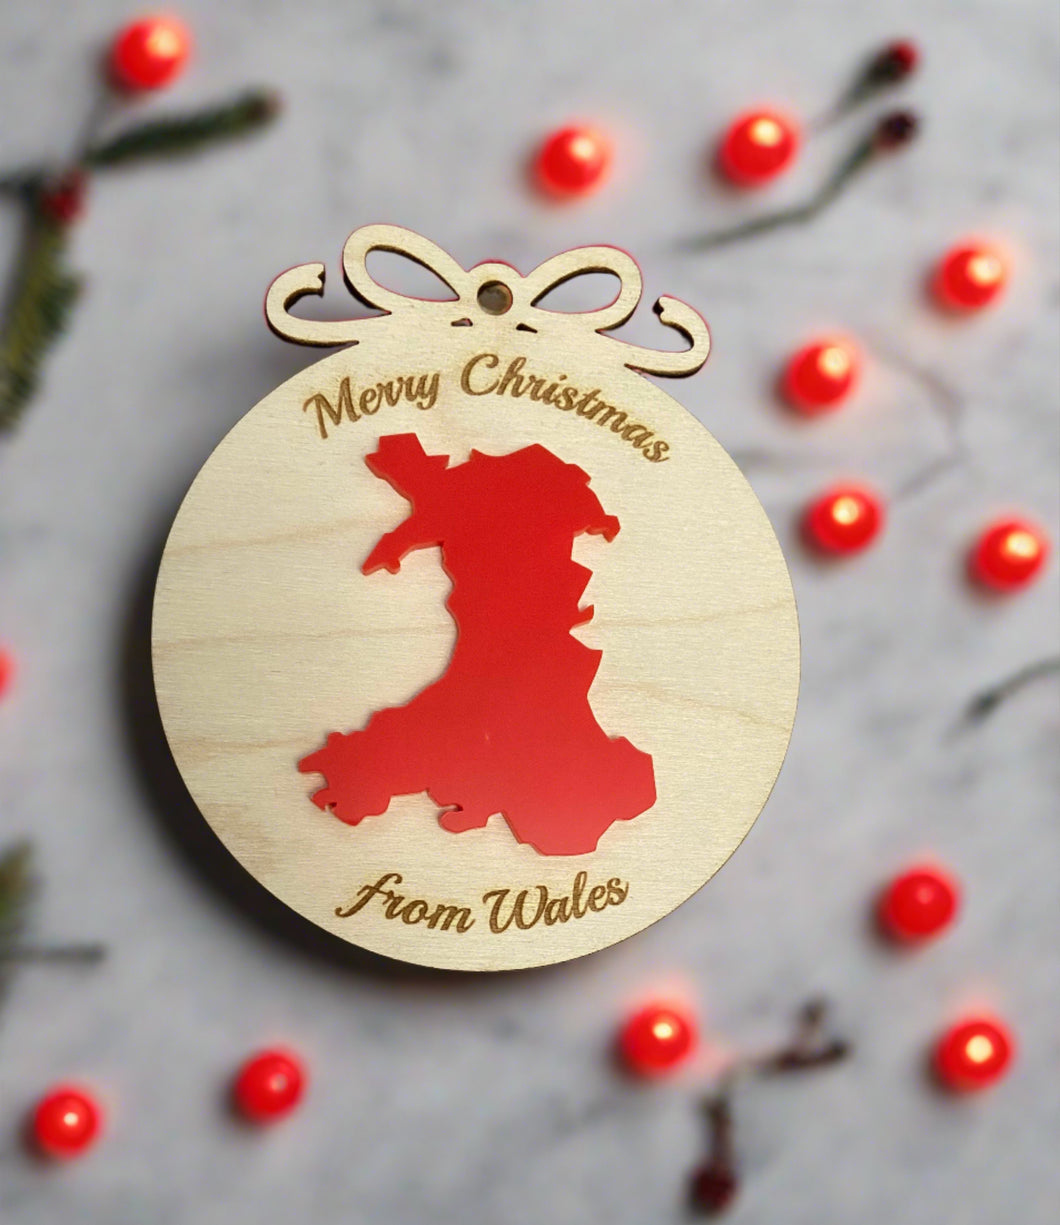 Merry Christmas from Wales bauble - Laser LLama Designs Ltd